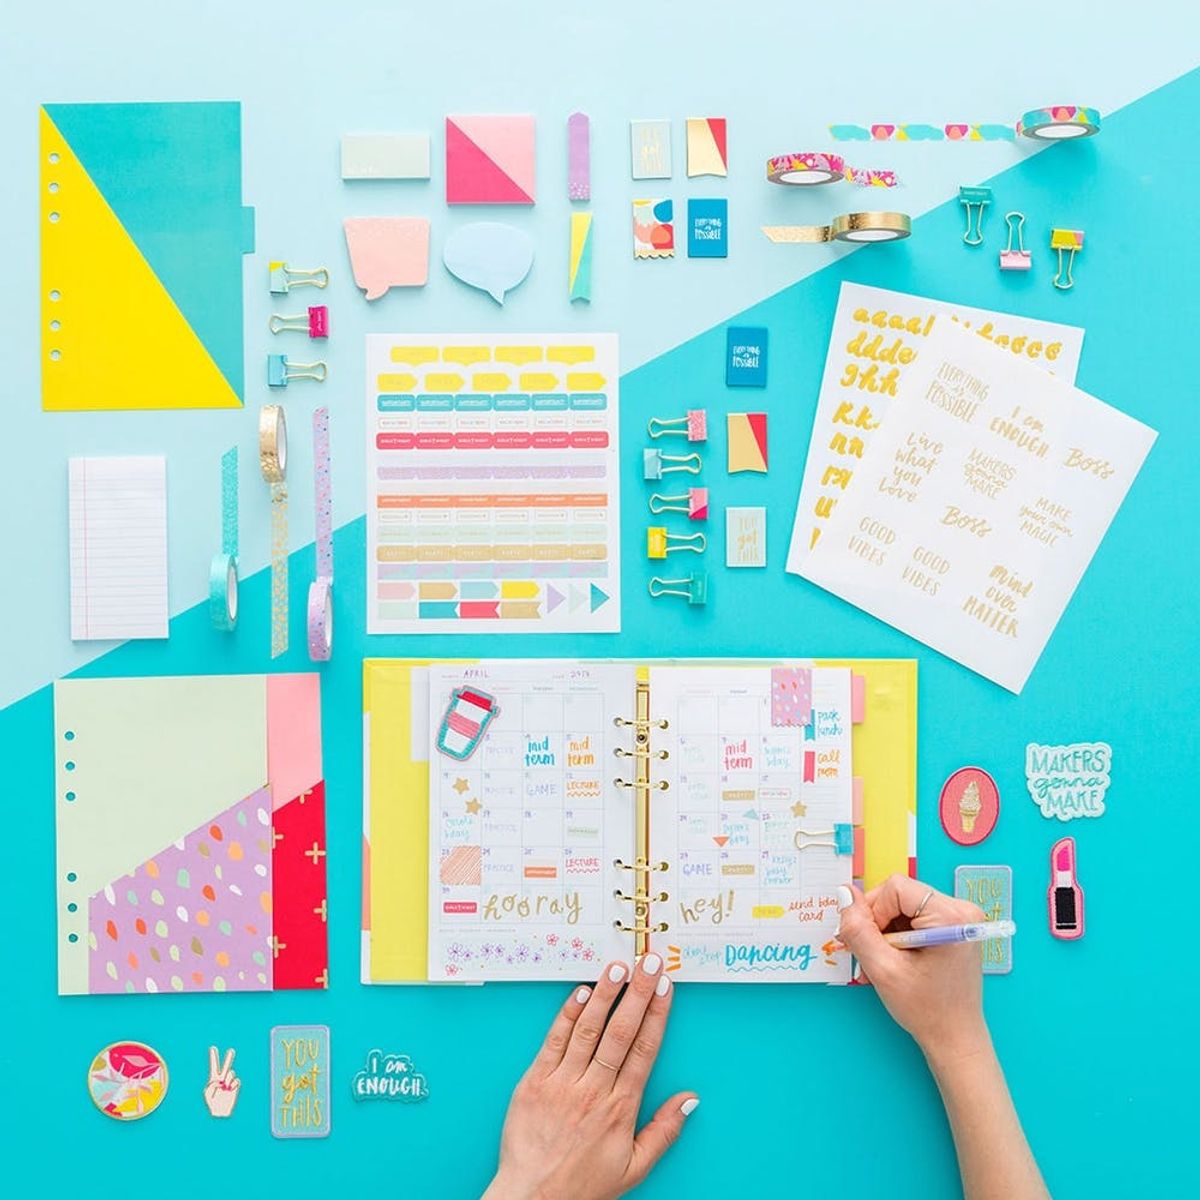 Add Personality to Your Planner With These Free Printable Stickers